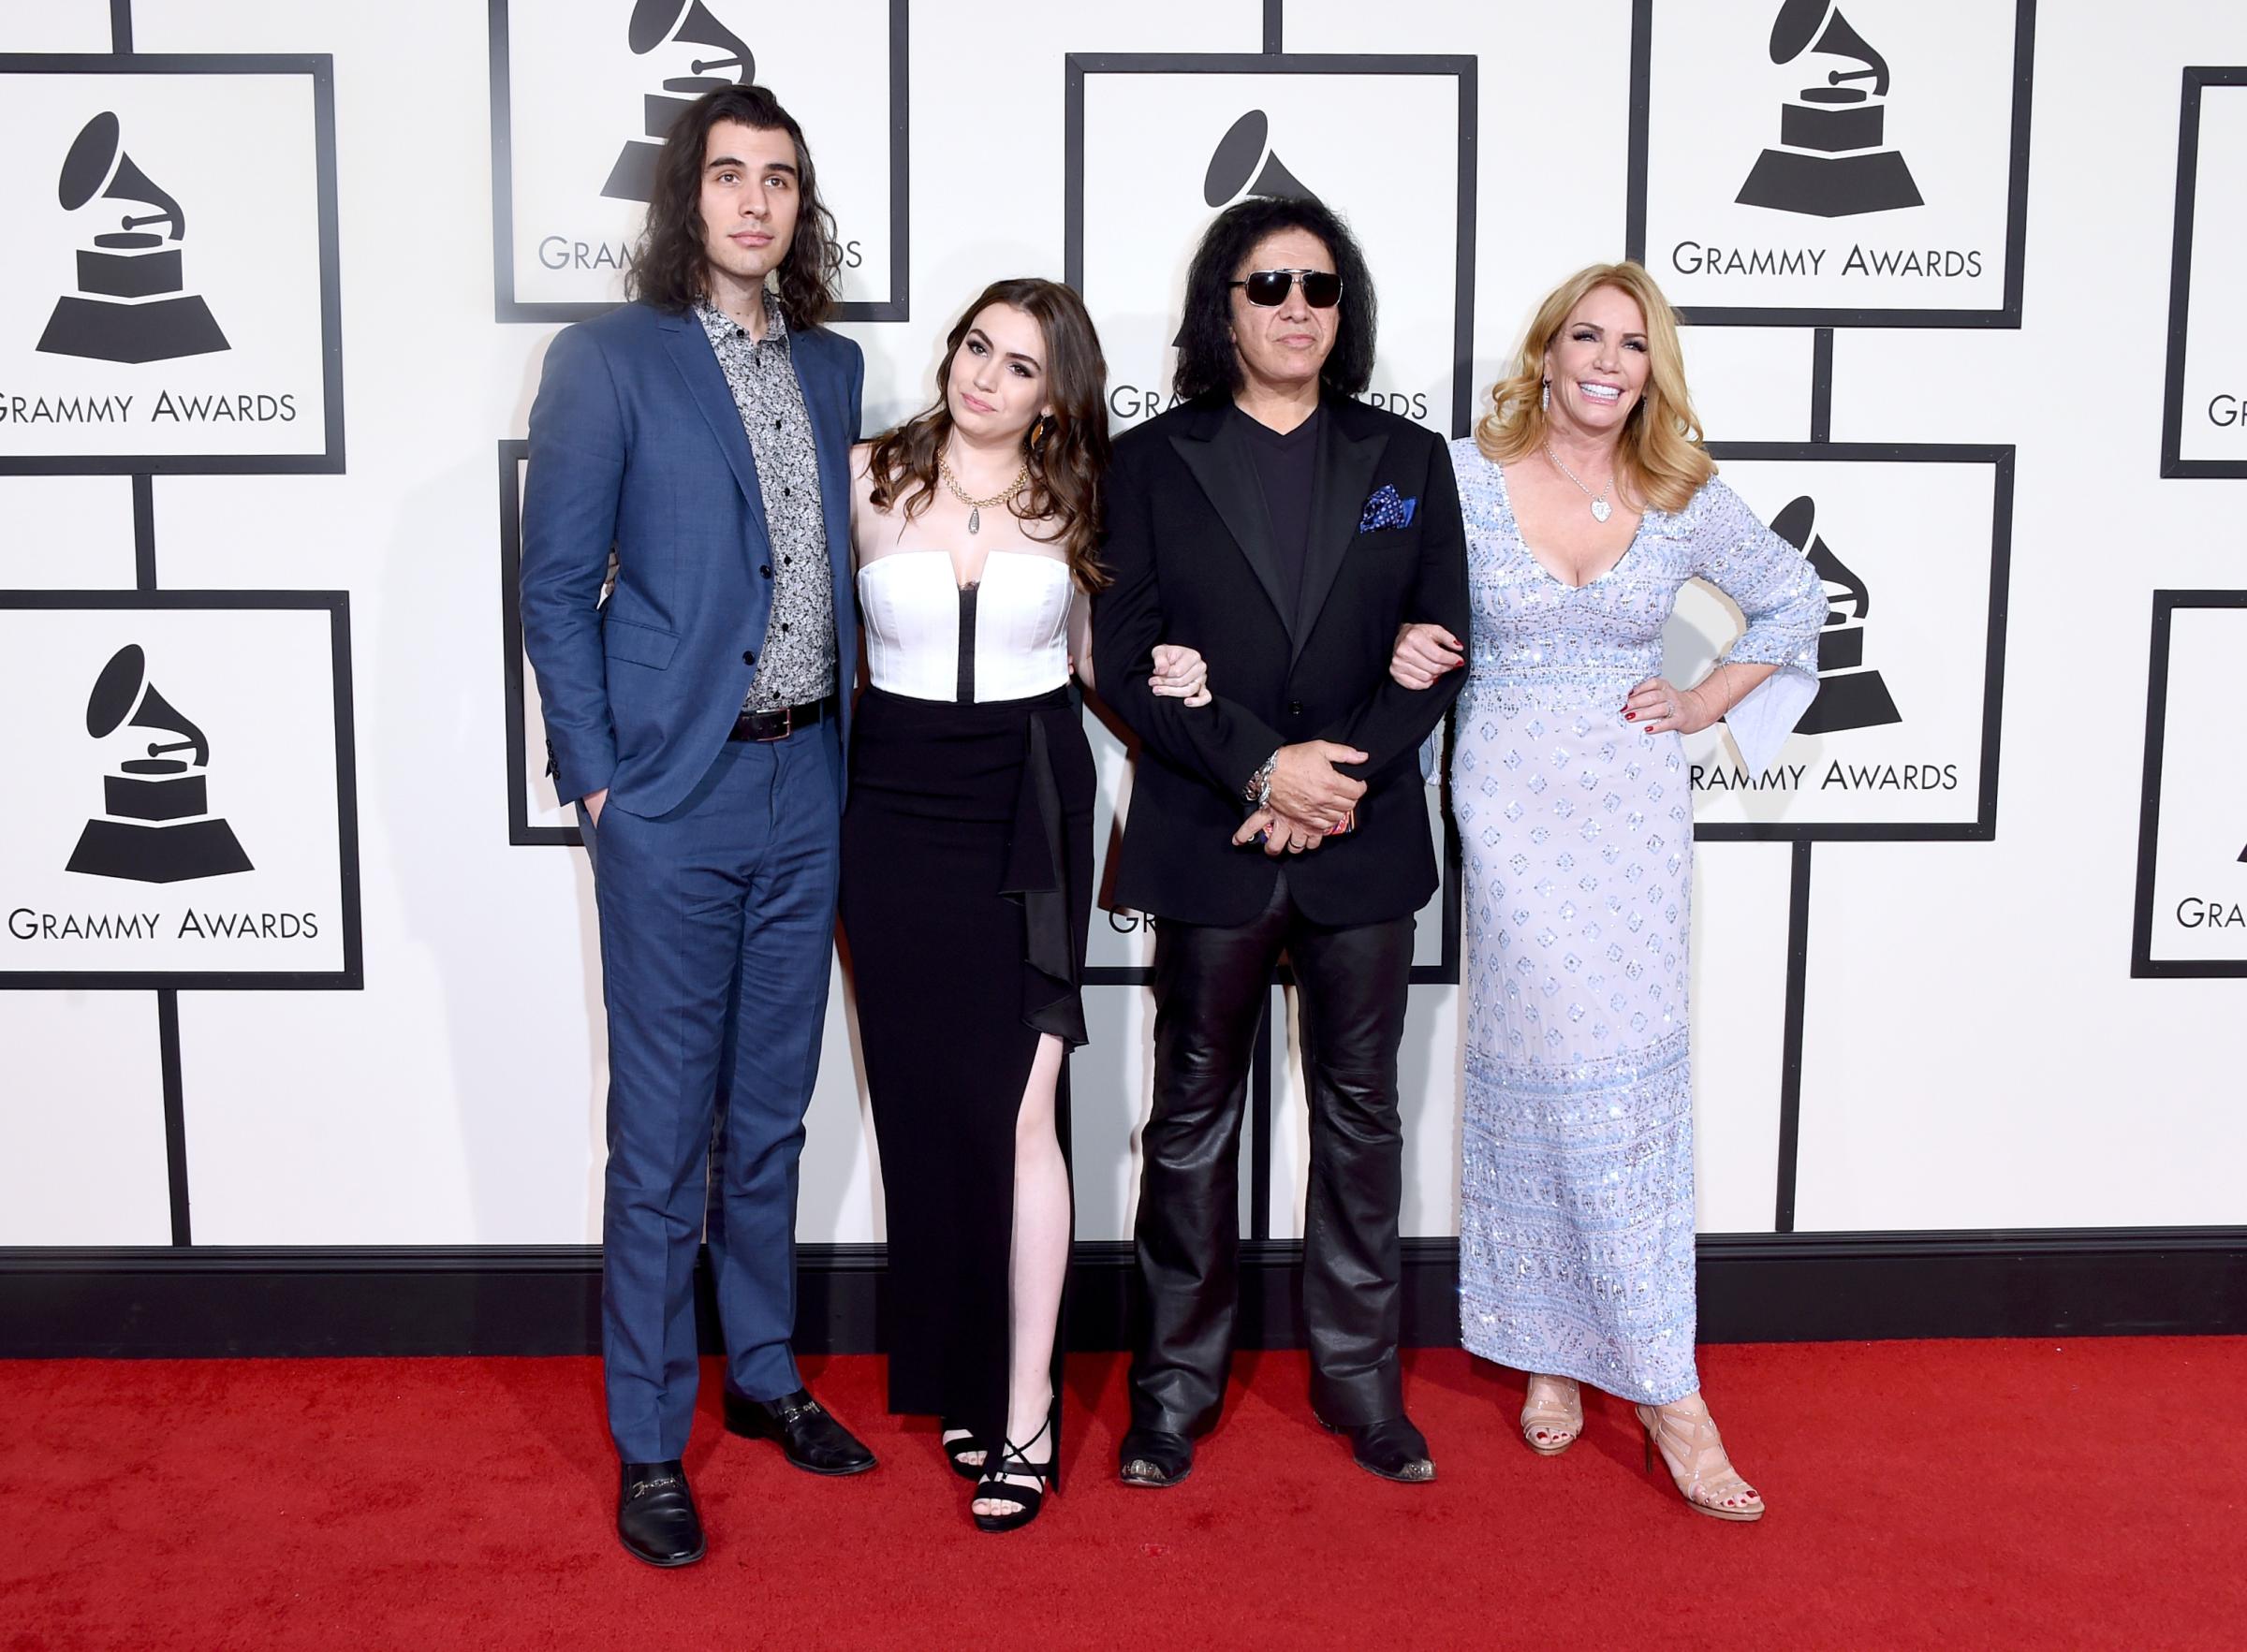 From left: Nick Simmons, Sophie Simmons, Gene Simmons, and Shannon Tweed attend the 58th GRAMMY Awards at Staples Center on Feb. 15, 2016 in Los Angeles.